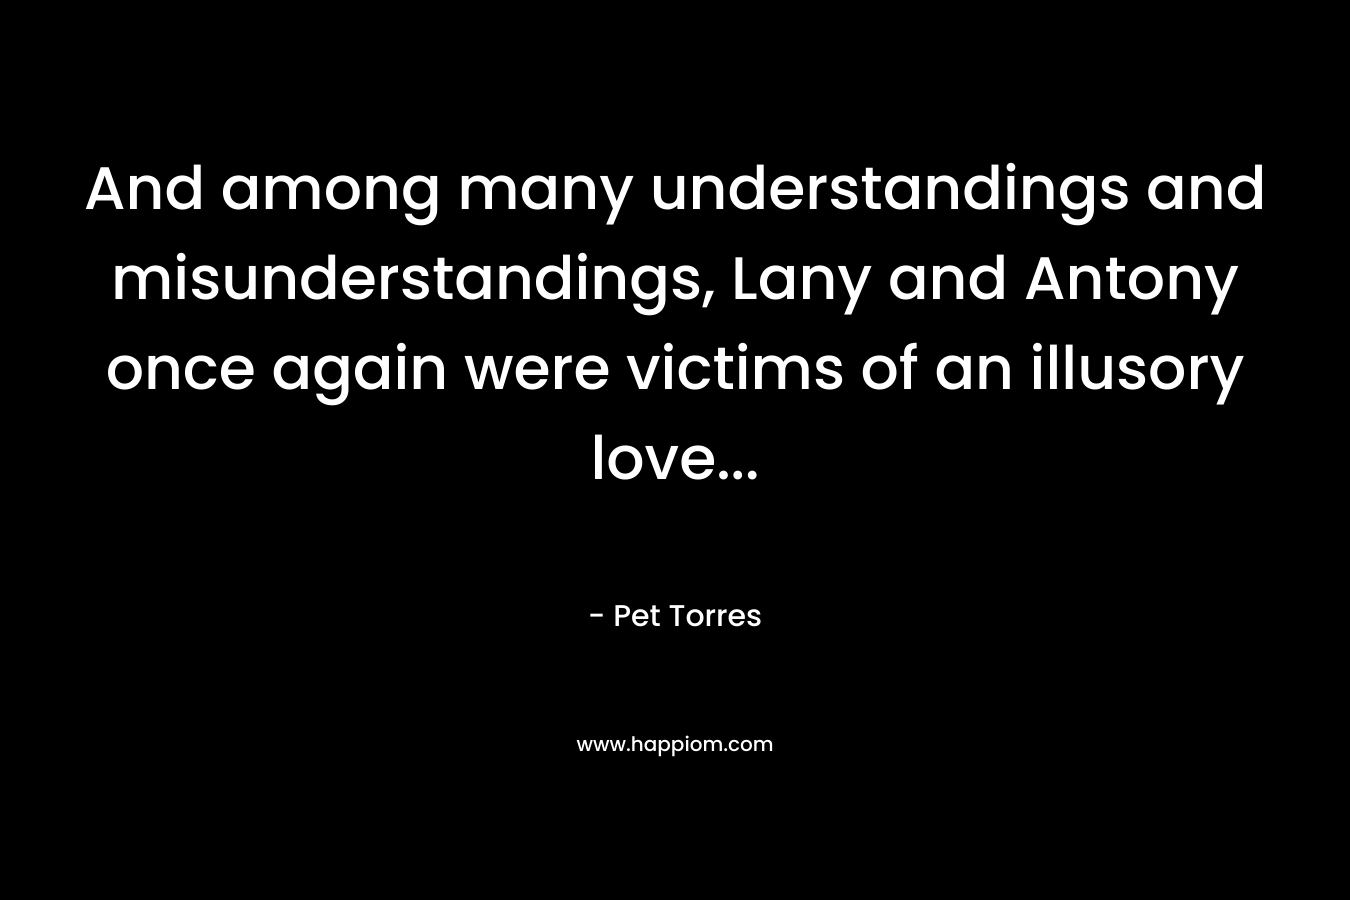 And among many understandings and misunderstandings, Lany and Antony once again were victims of an illusory love… – Pet Torres